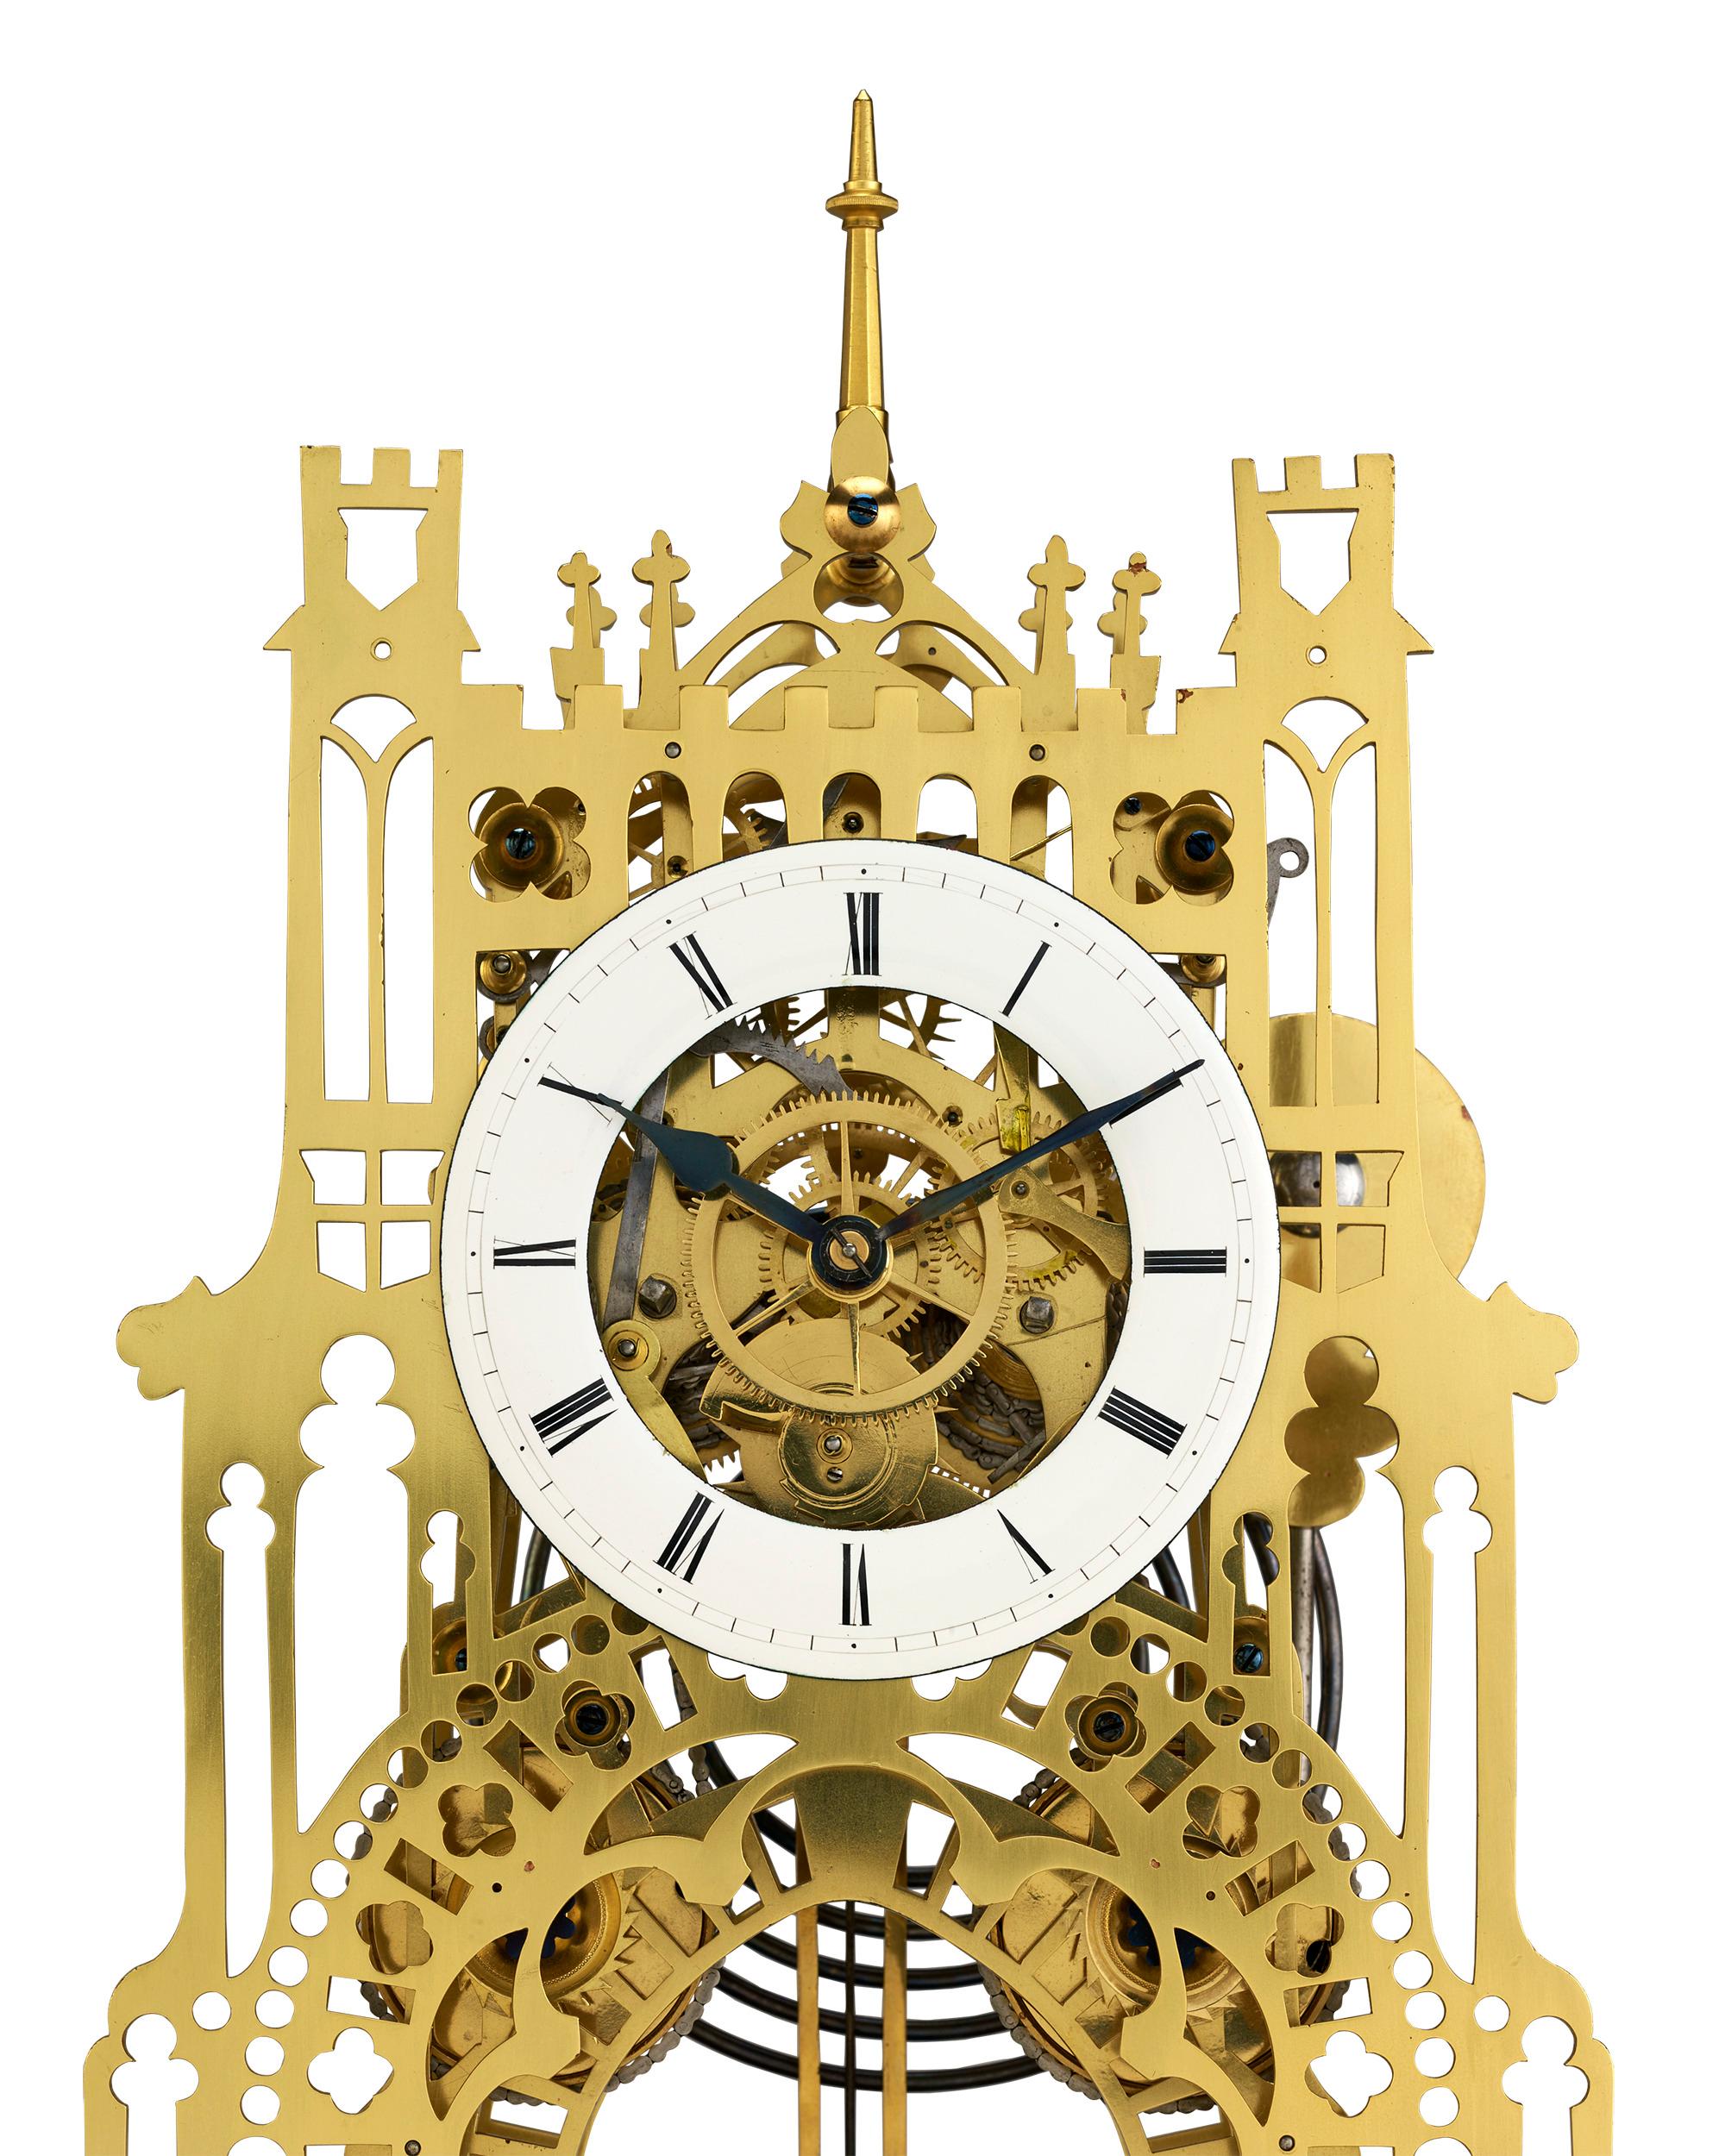 Depicting St. James Palace in London, this remarkable two-train fusée architectural skeleton clock is a wonderful specimen of 19th-century English clockmaking. Crafted by the preeminent firm of Evans of Handsworth, Birmingham, this rare